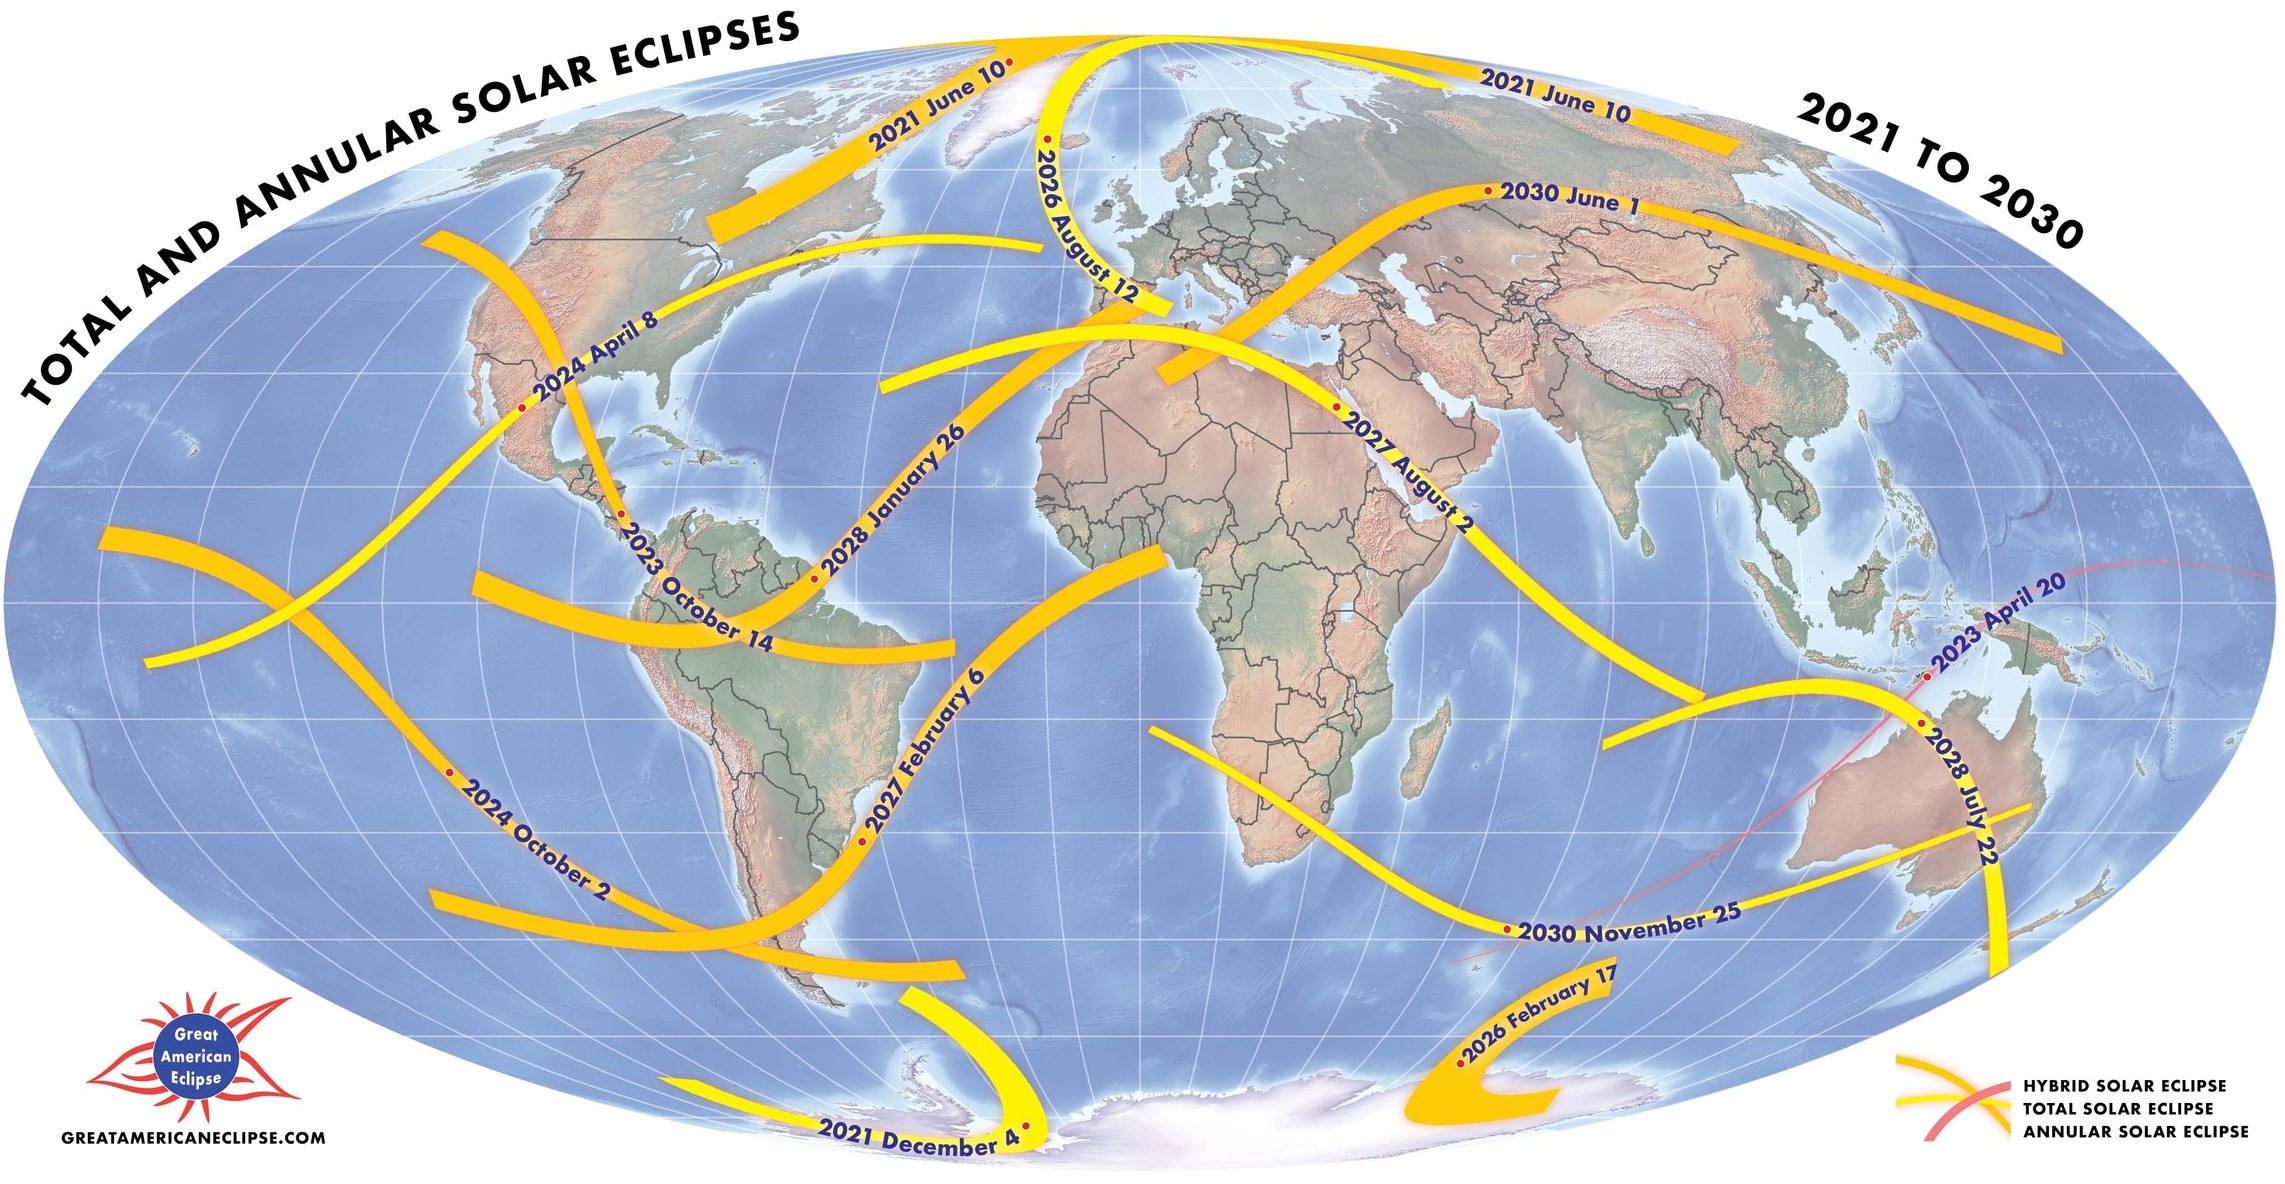 Paths of solar eclipses between 2021 and 2030